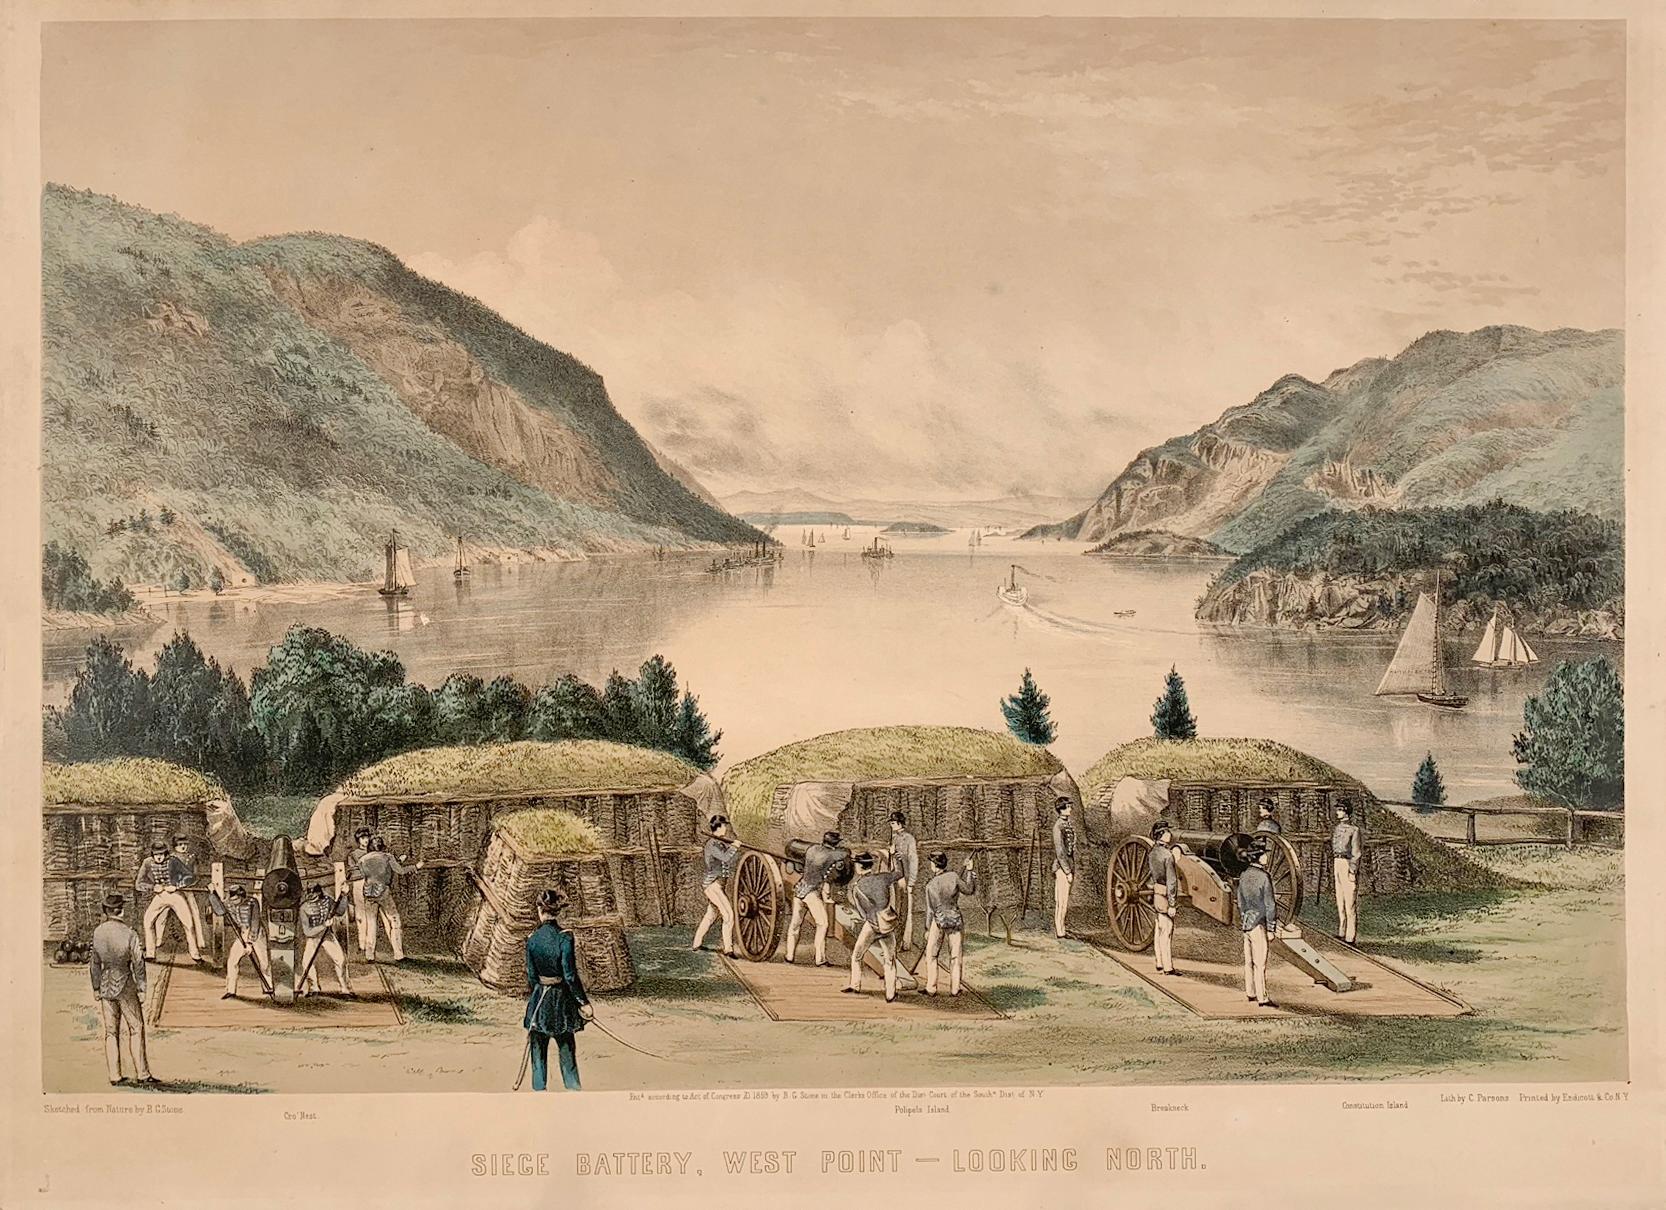 Charles Parsons Landscape Print - Siege Battery, West Point - Looking North